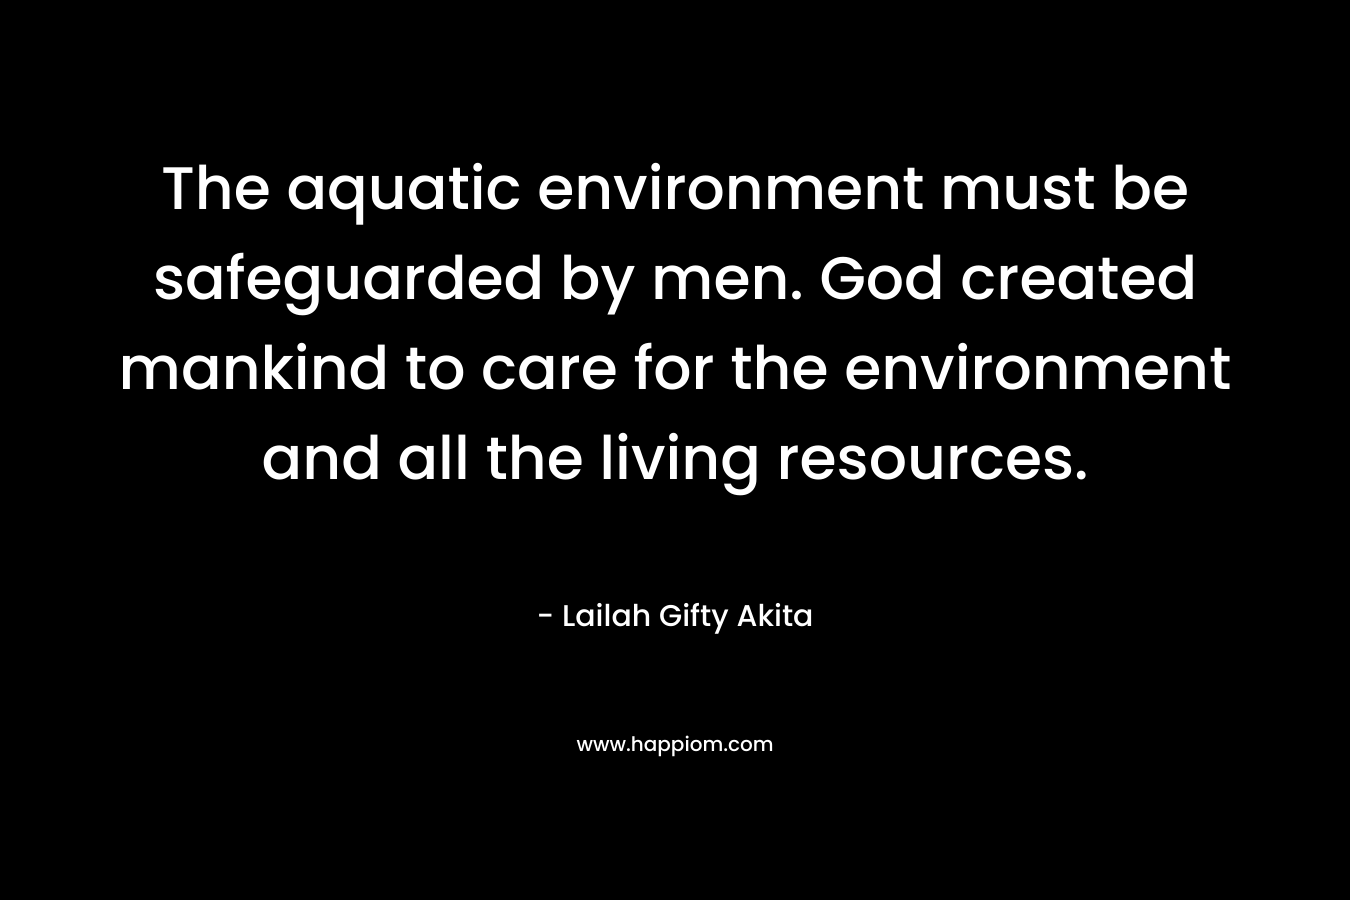 The aquatic environment must be safeguarded by men. God created mankind to care for the environment and all the living resources.